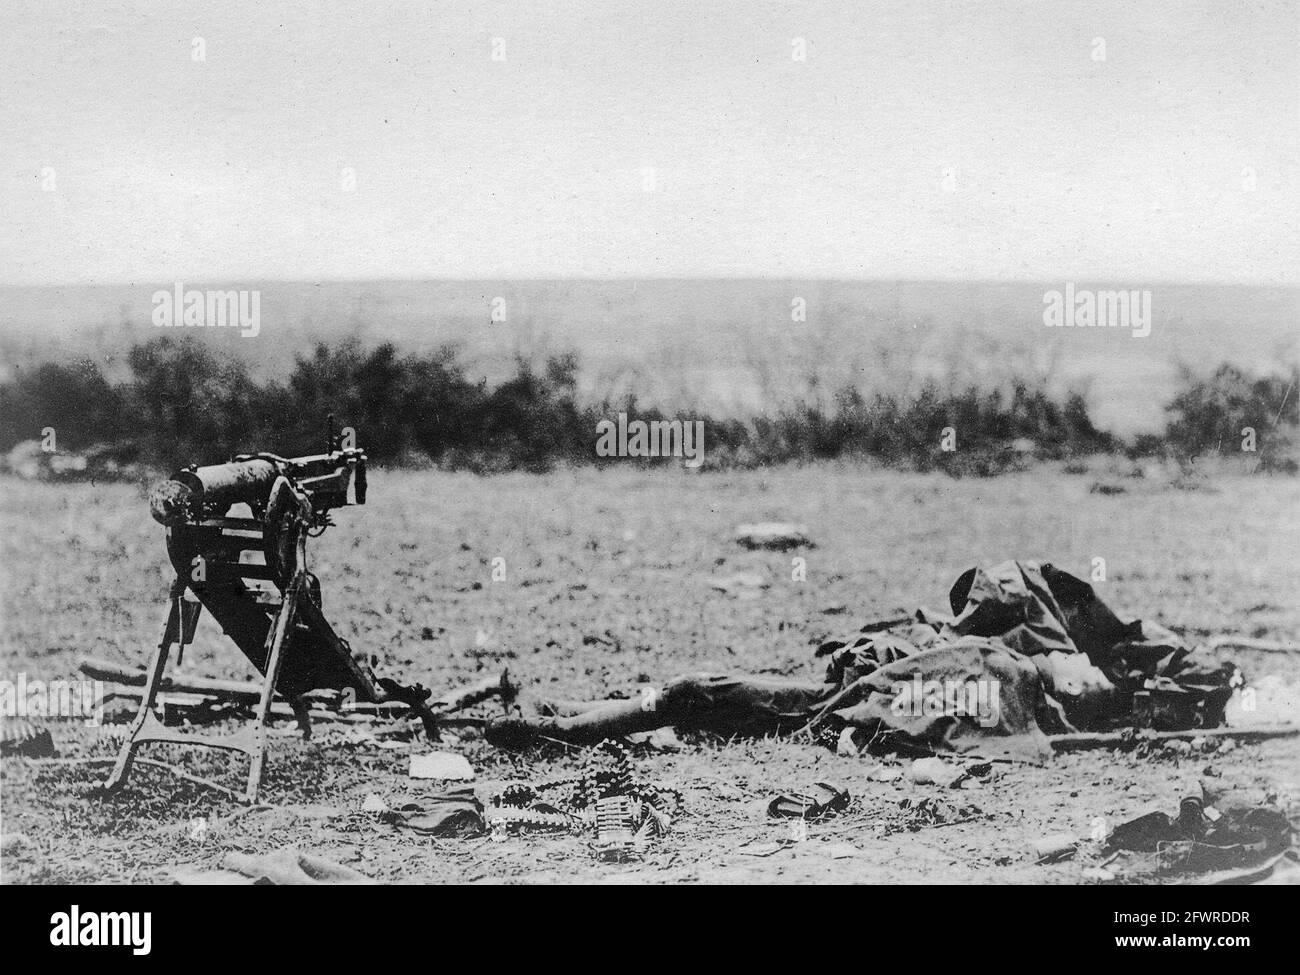 A German soldier who was killed manning his machine gun. During the Meuse-Argonne offensive, Germans made extensive use of machine guns to hinder the American’s advance. Stock Photo